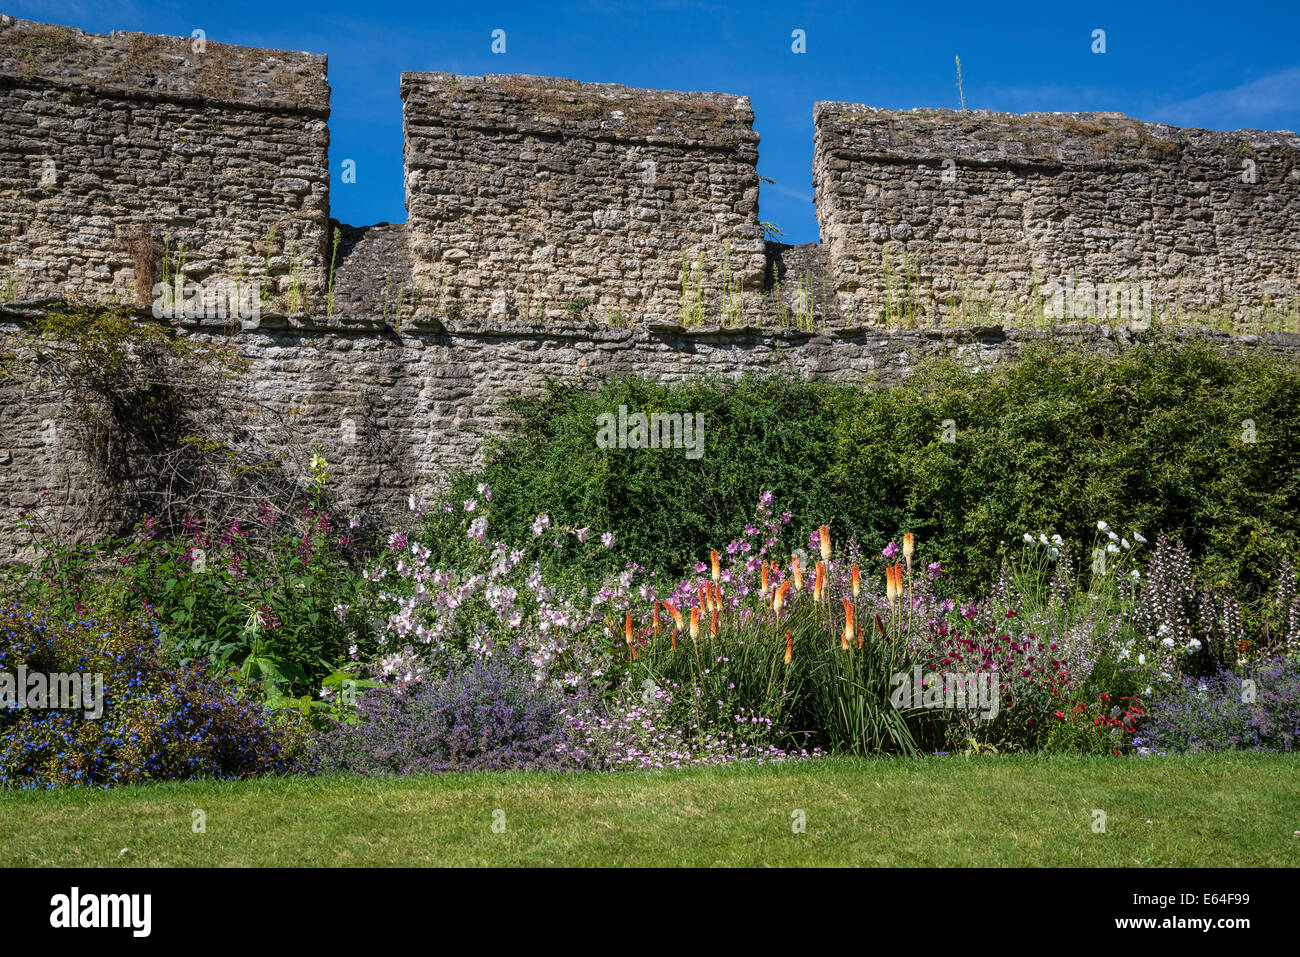 Gardens with City Wall and herbaceous border, New College, Oxford, England, UK Stock Photo